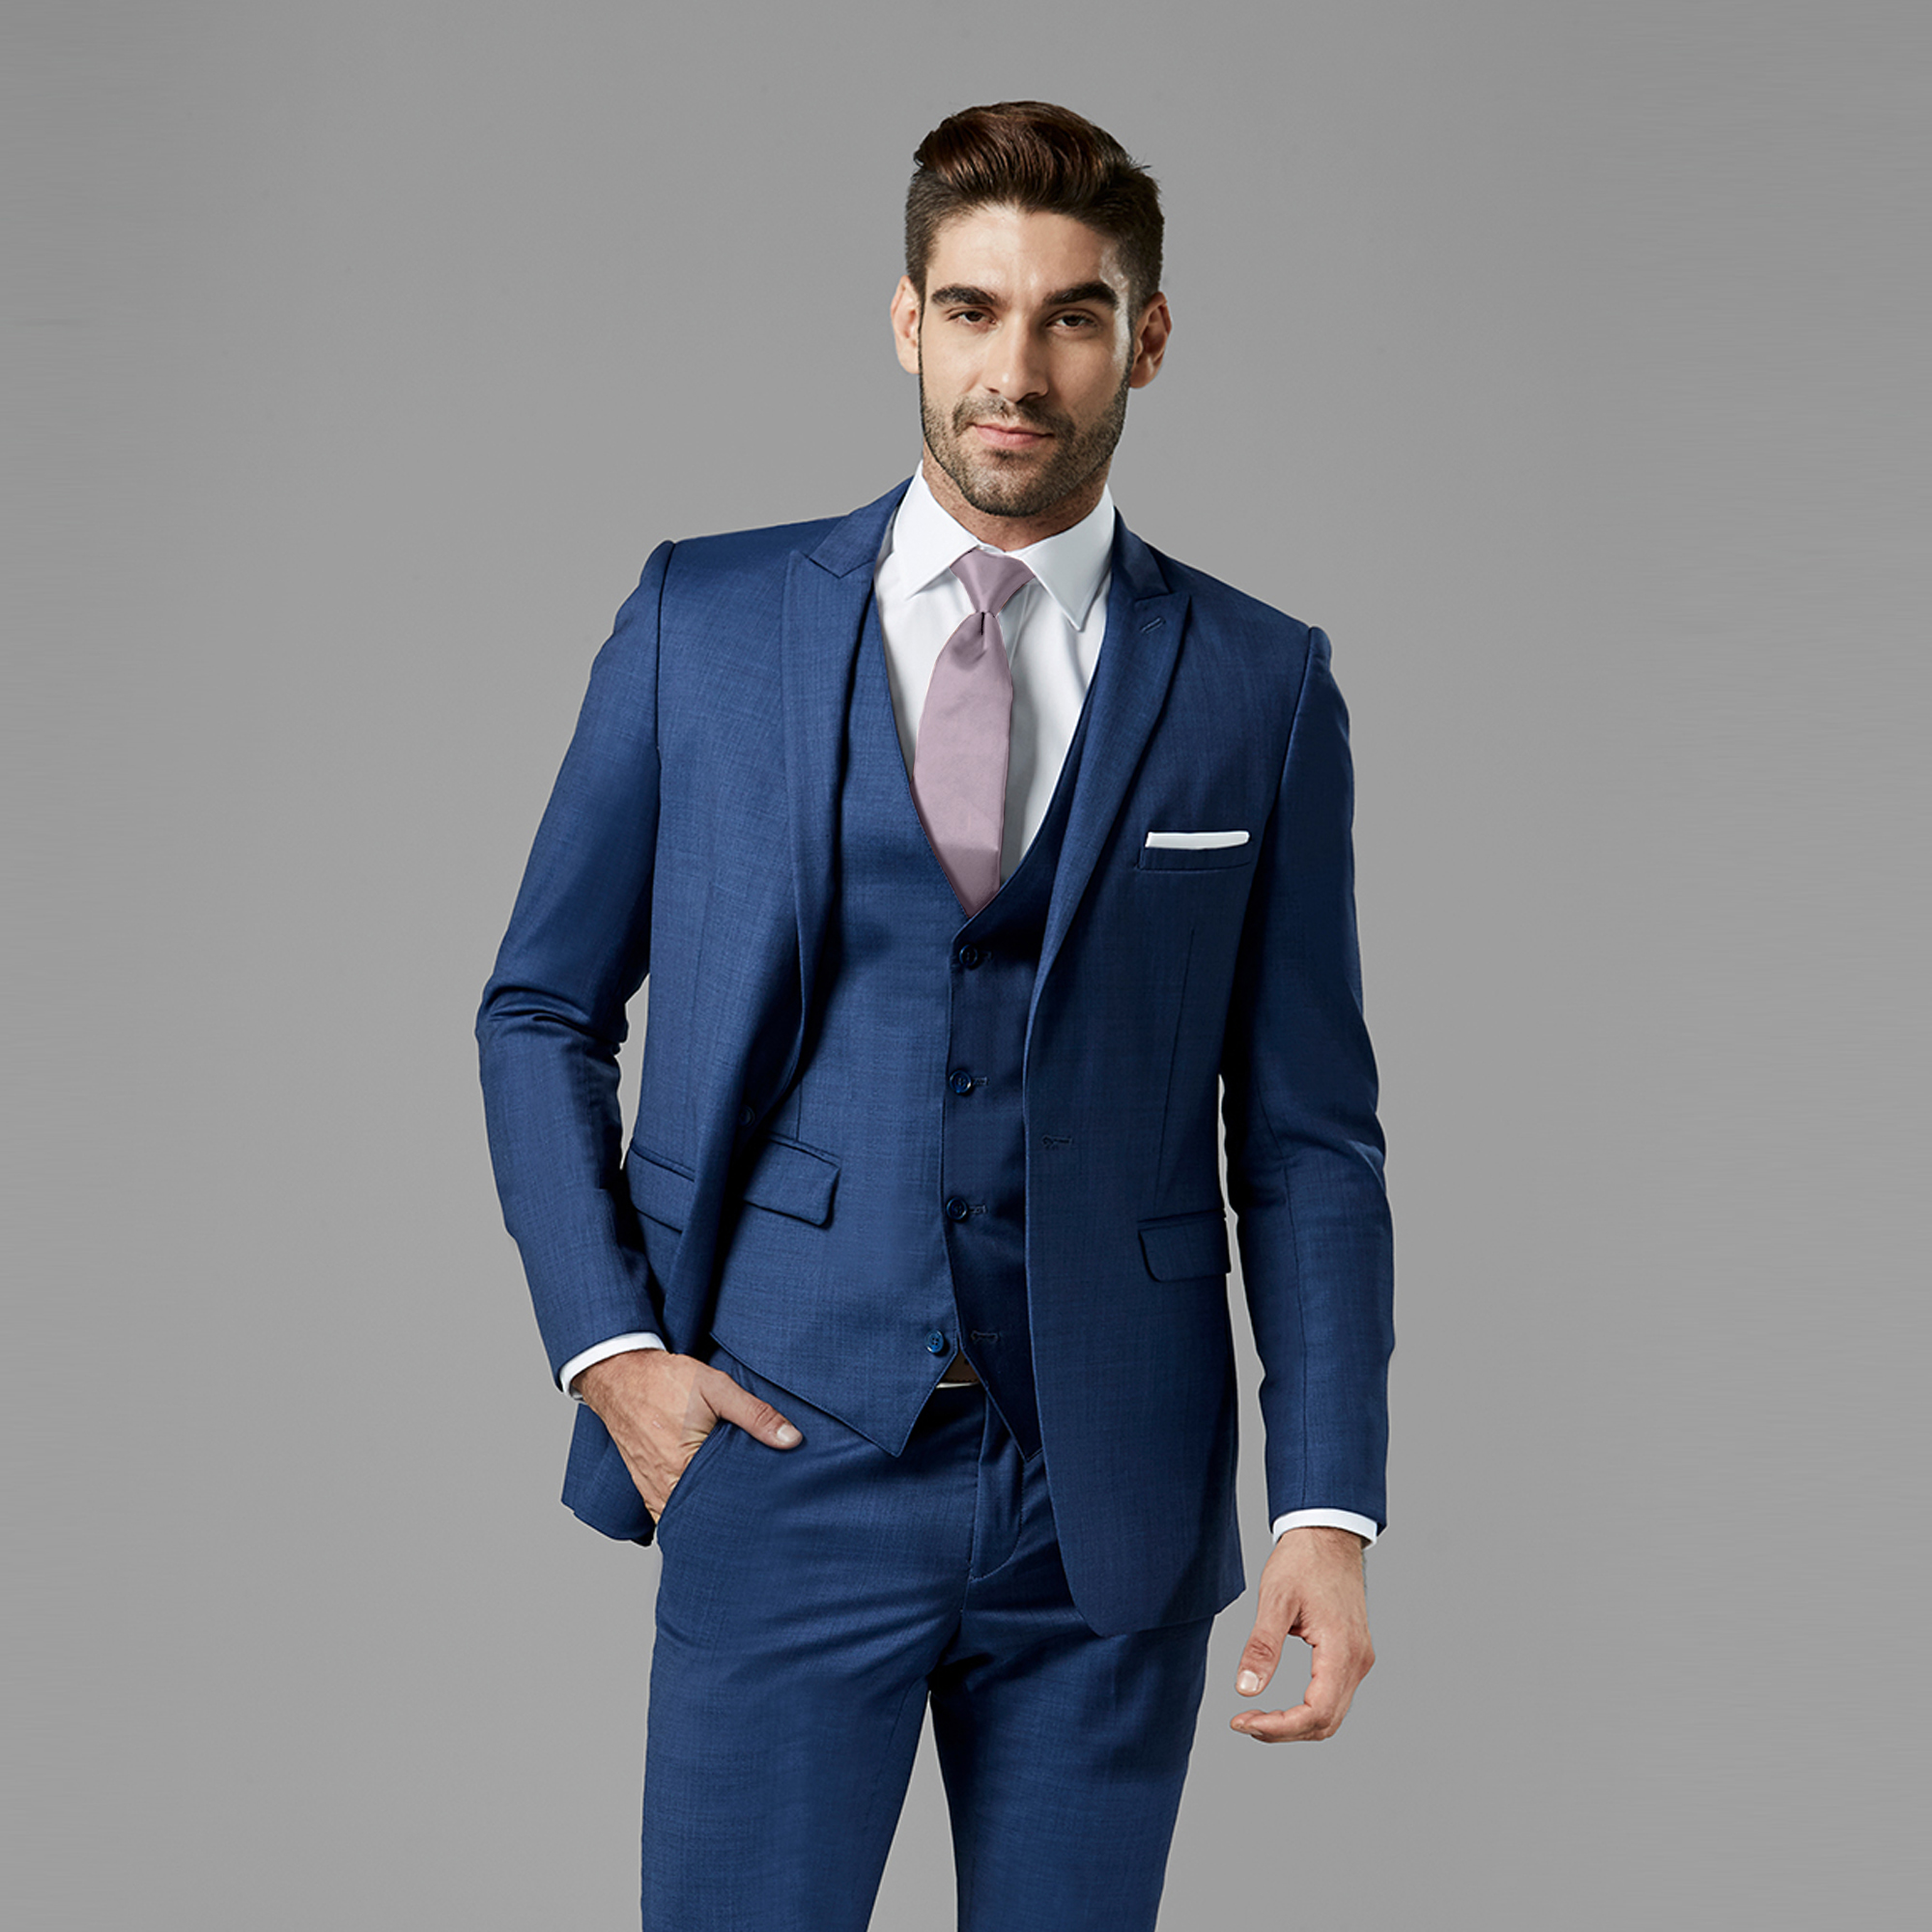 Navy Suit and Blue Shirt | Navy blue suit outfit, Dark blue dress shirt, Blue  suit outfit